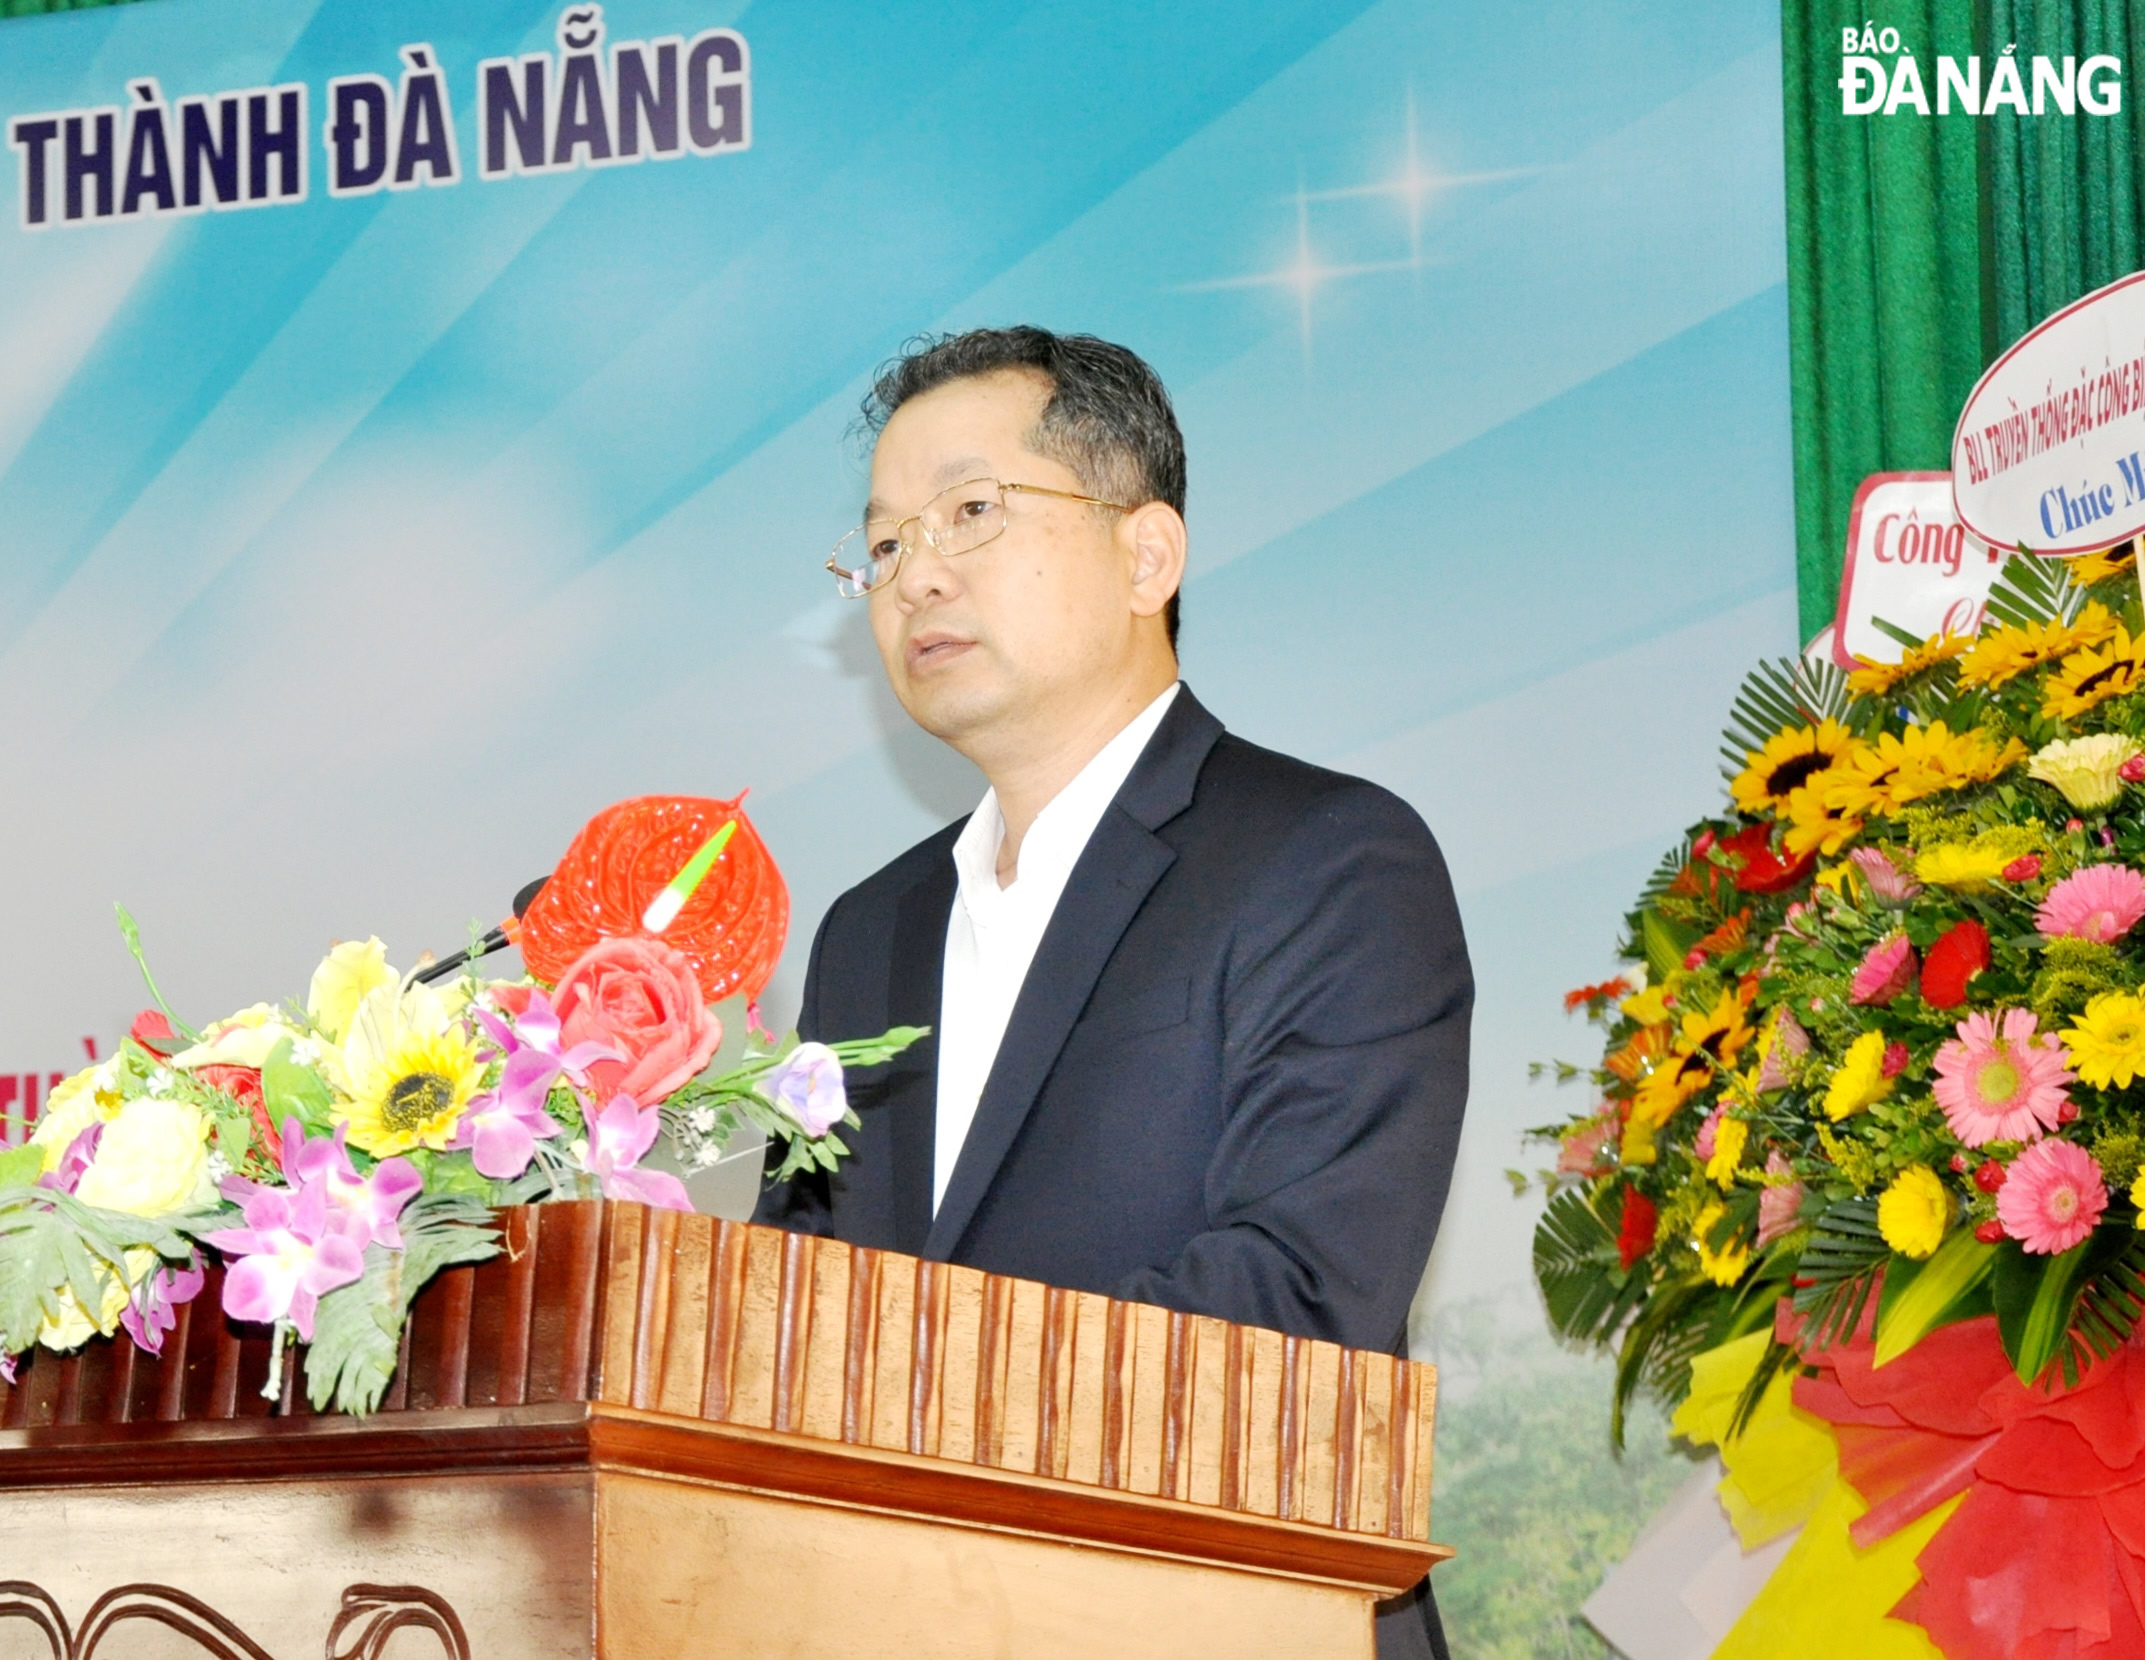 Da Nang Party Committee Secretary Nguyen Van Quang speaking at the get-together